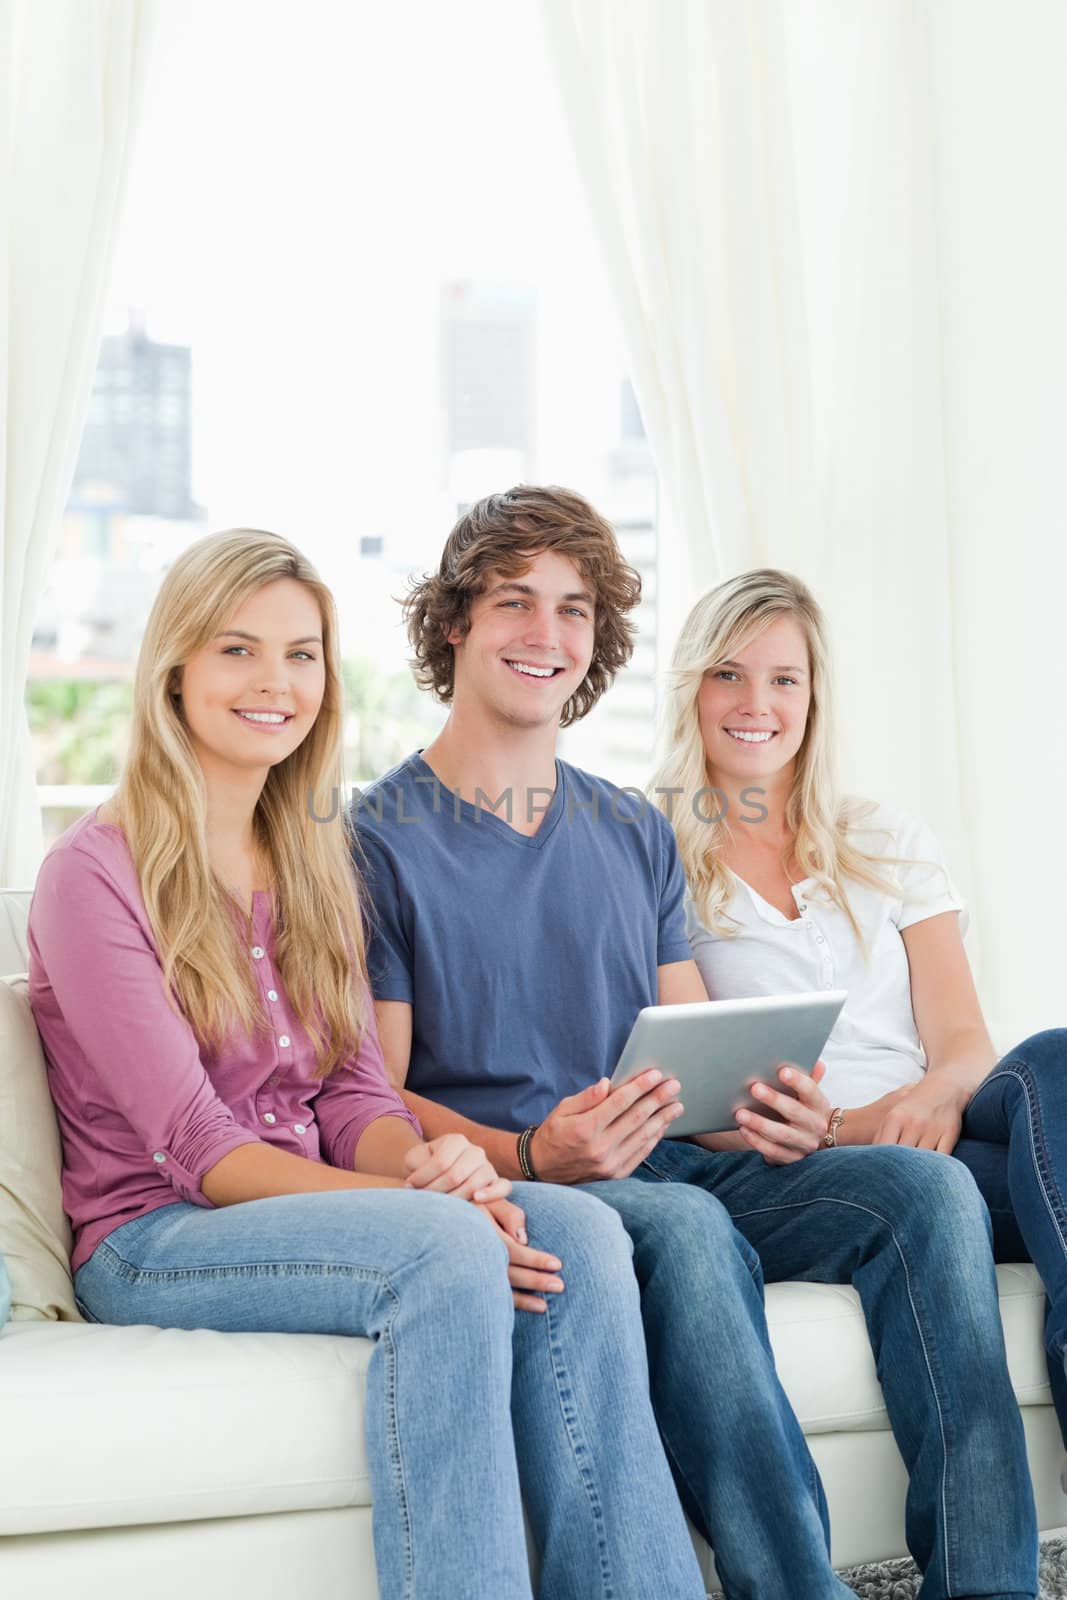 Two sisters and a brother sit together on the couch as the brother holds the tablet while they all look at the camera 